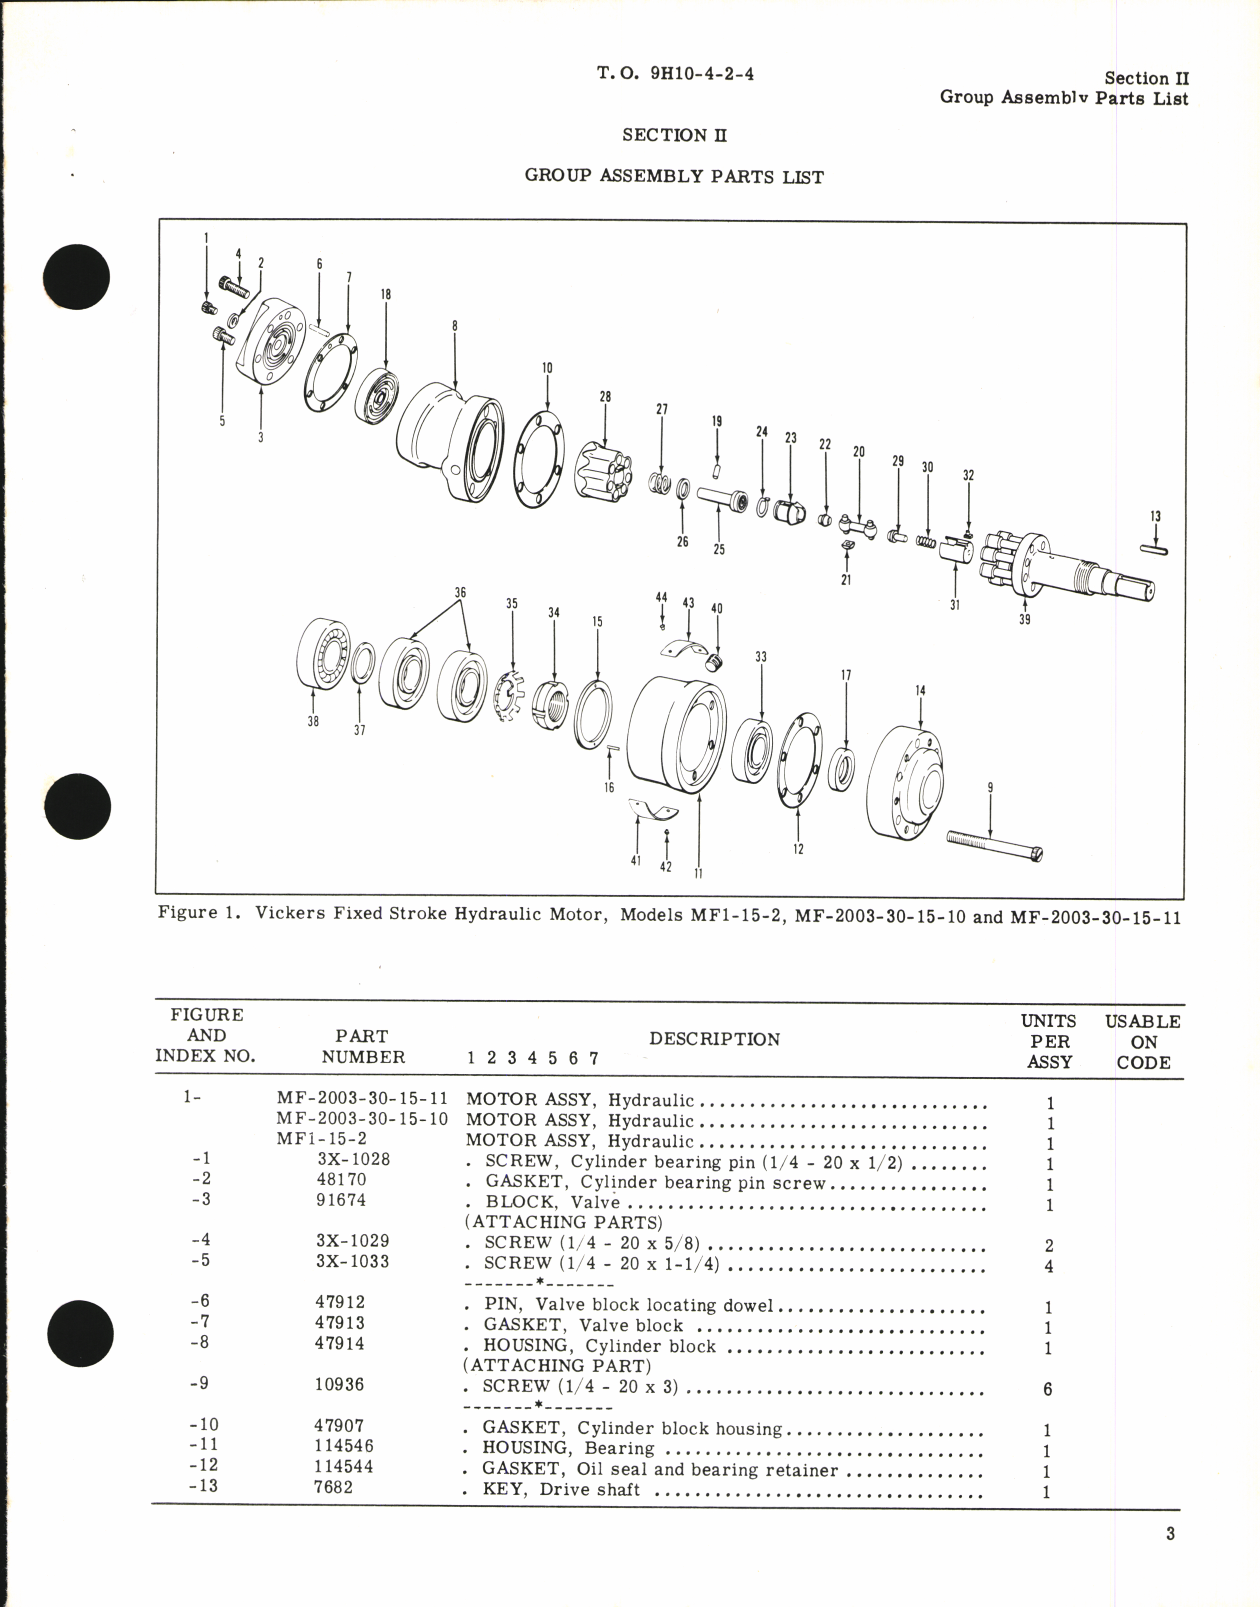 Sample page 5 from AirCorps Library document: Handbook of Illustrated Parts Breakdown for Hydraulic Motor Assembly 